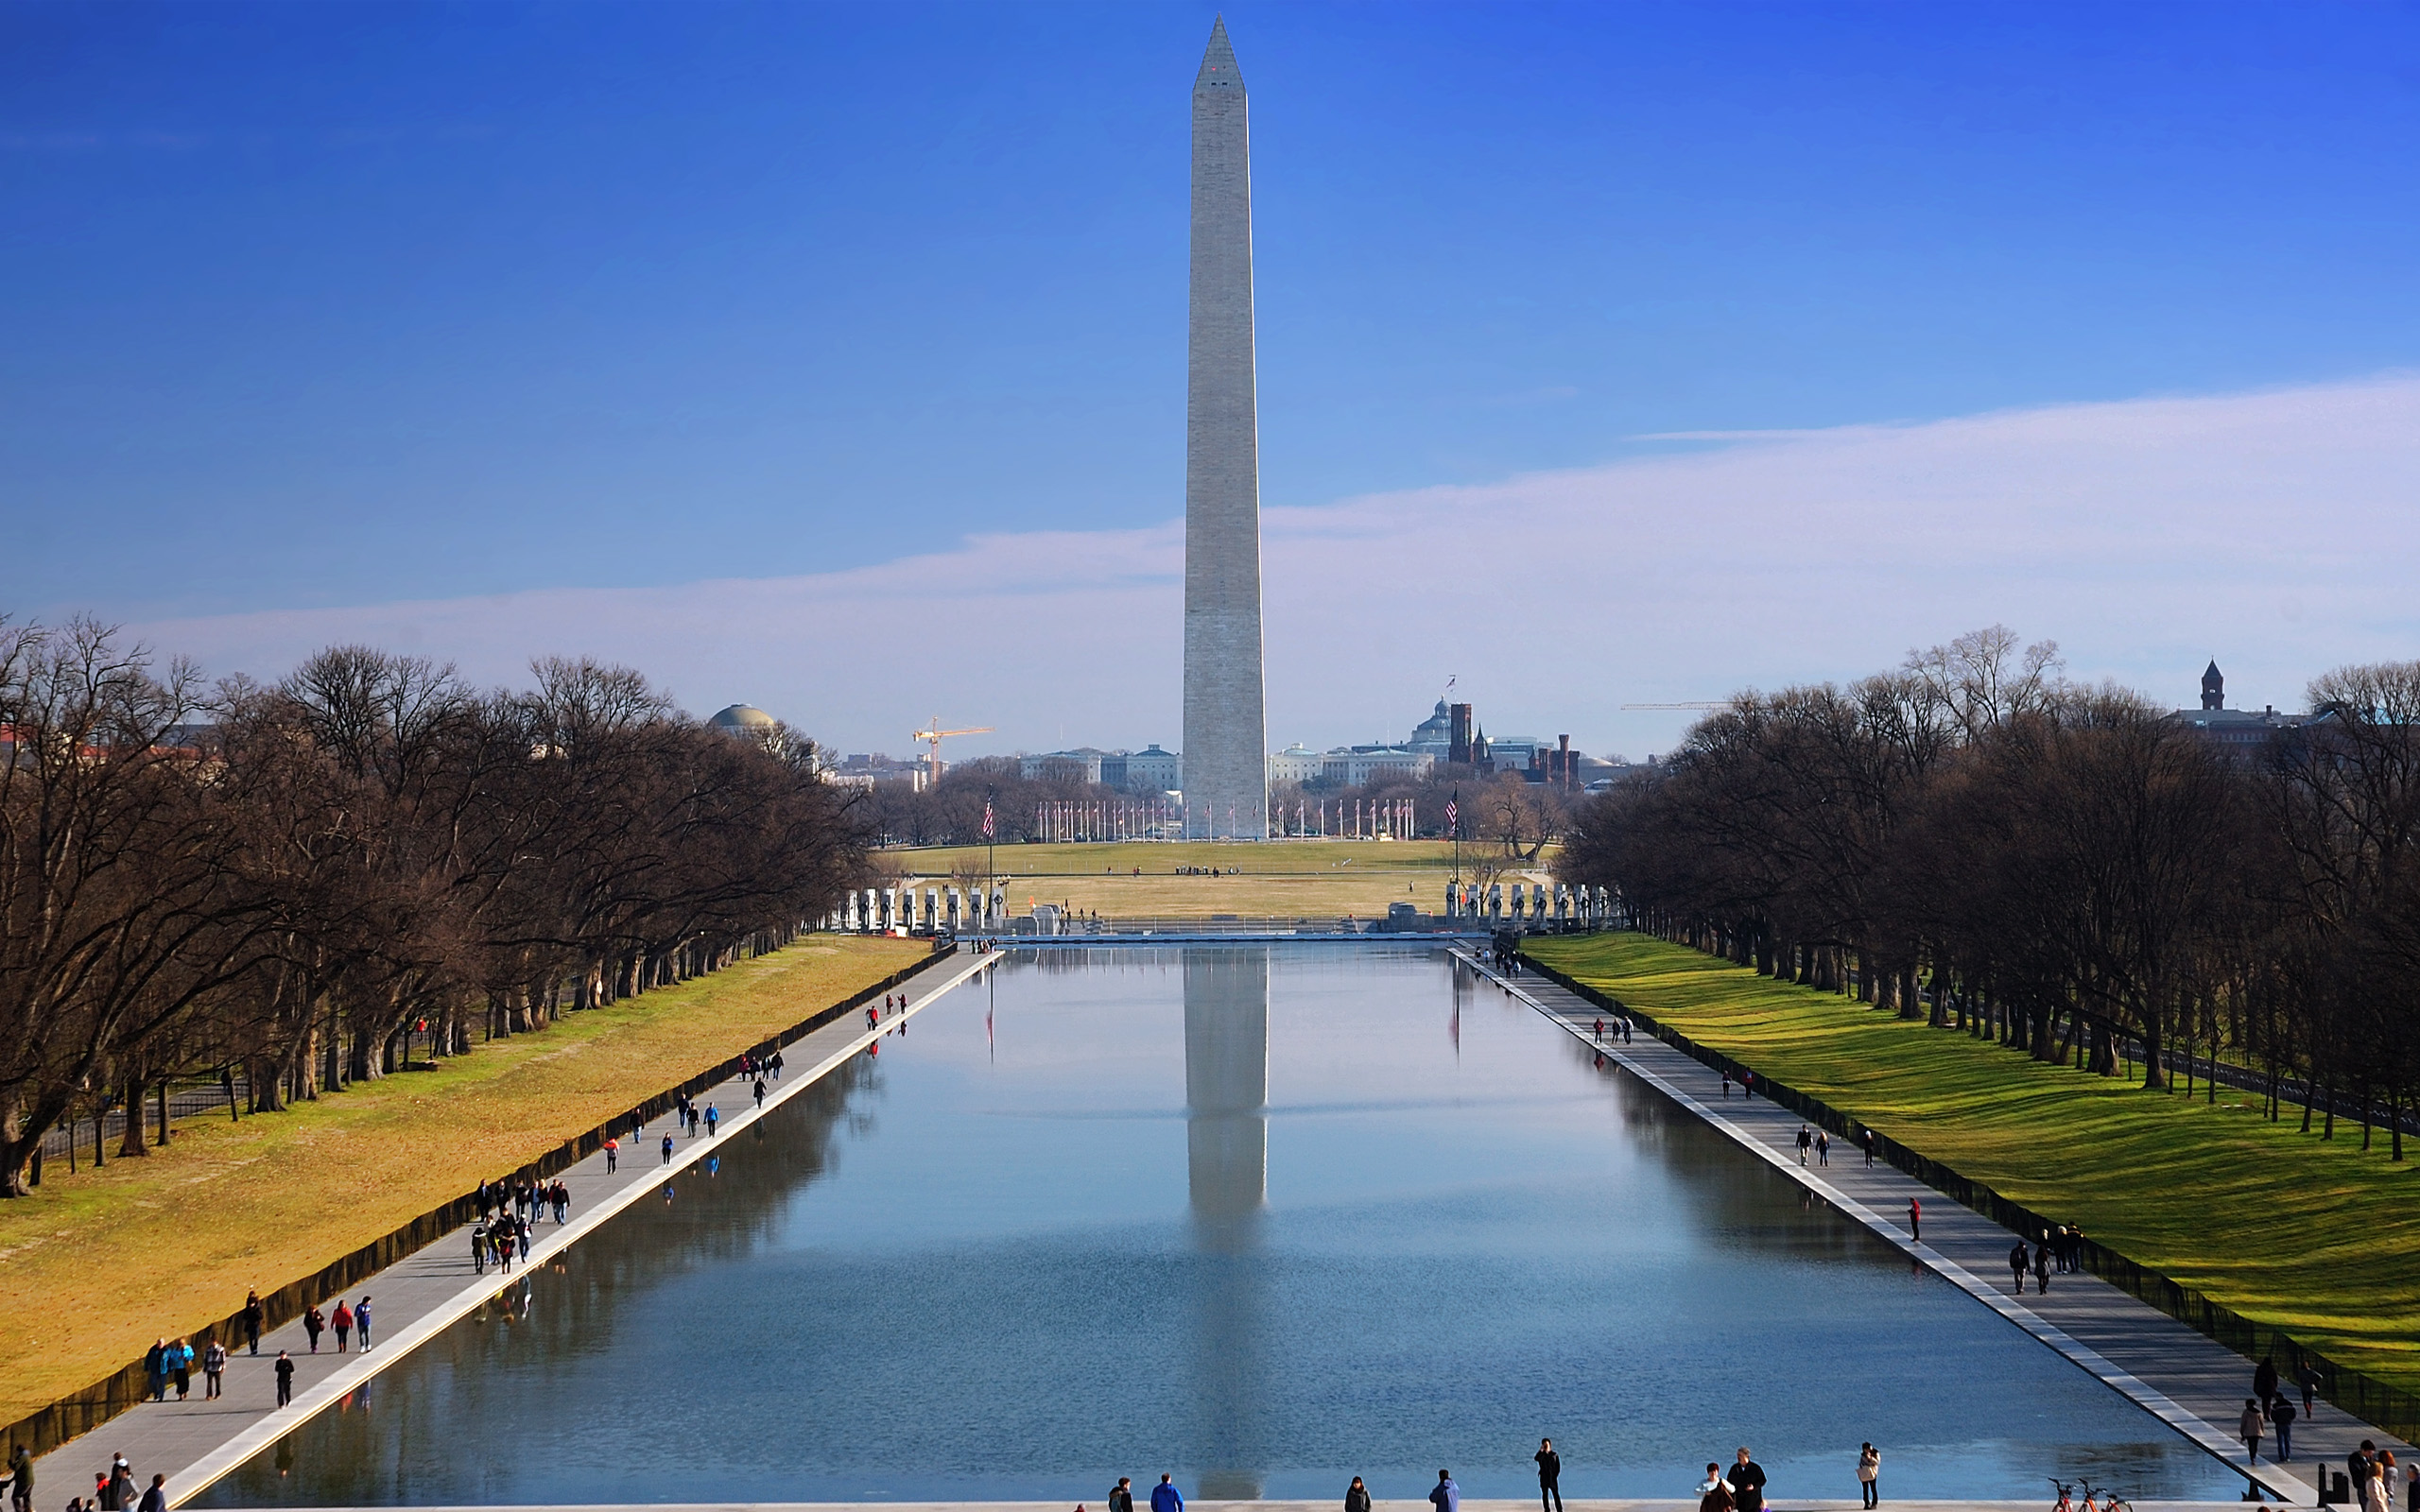 33 Washington Wallpaper Pictures For Free Download In High Def